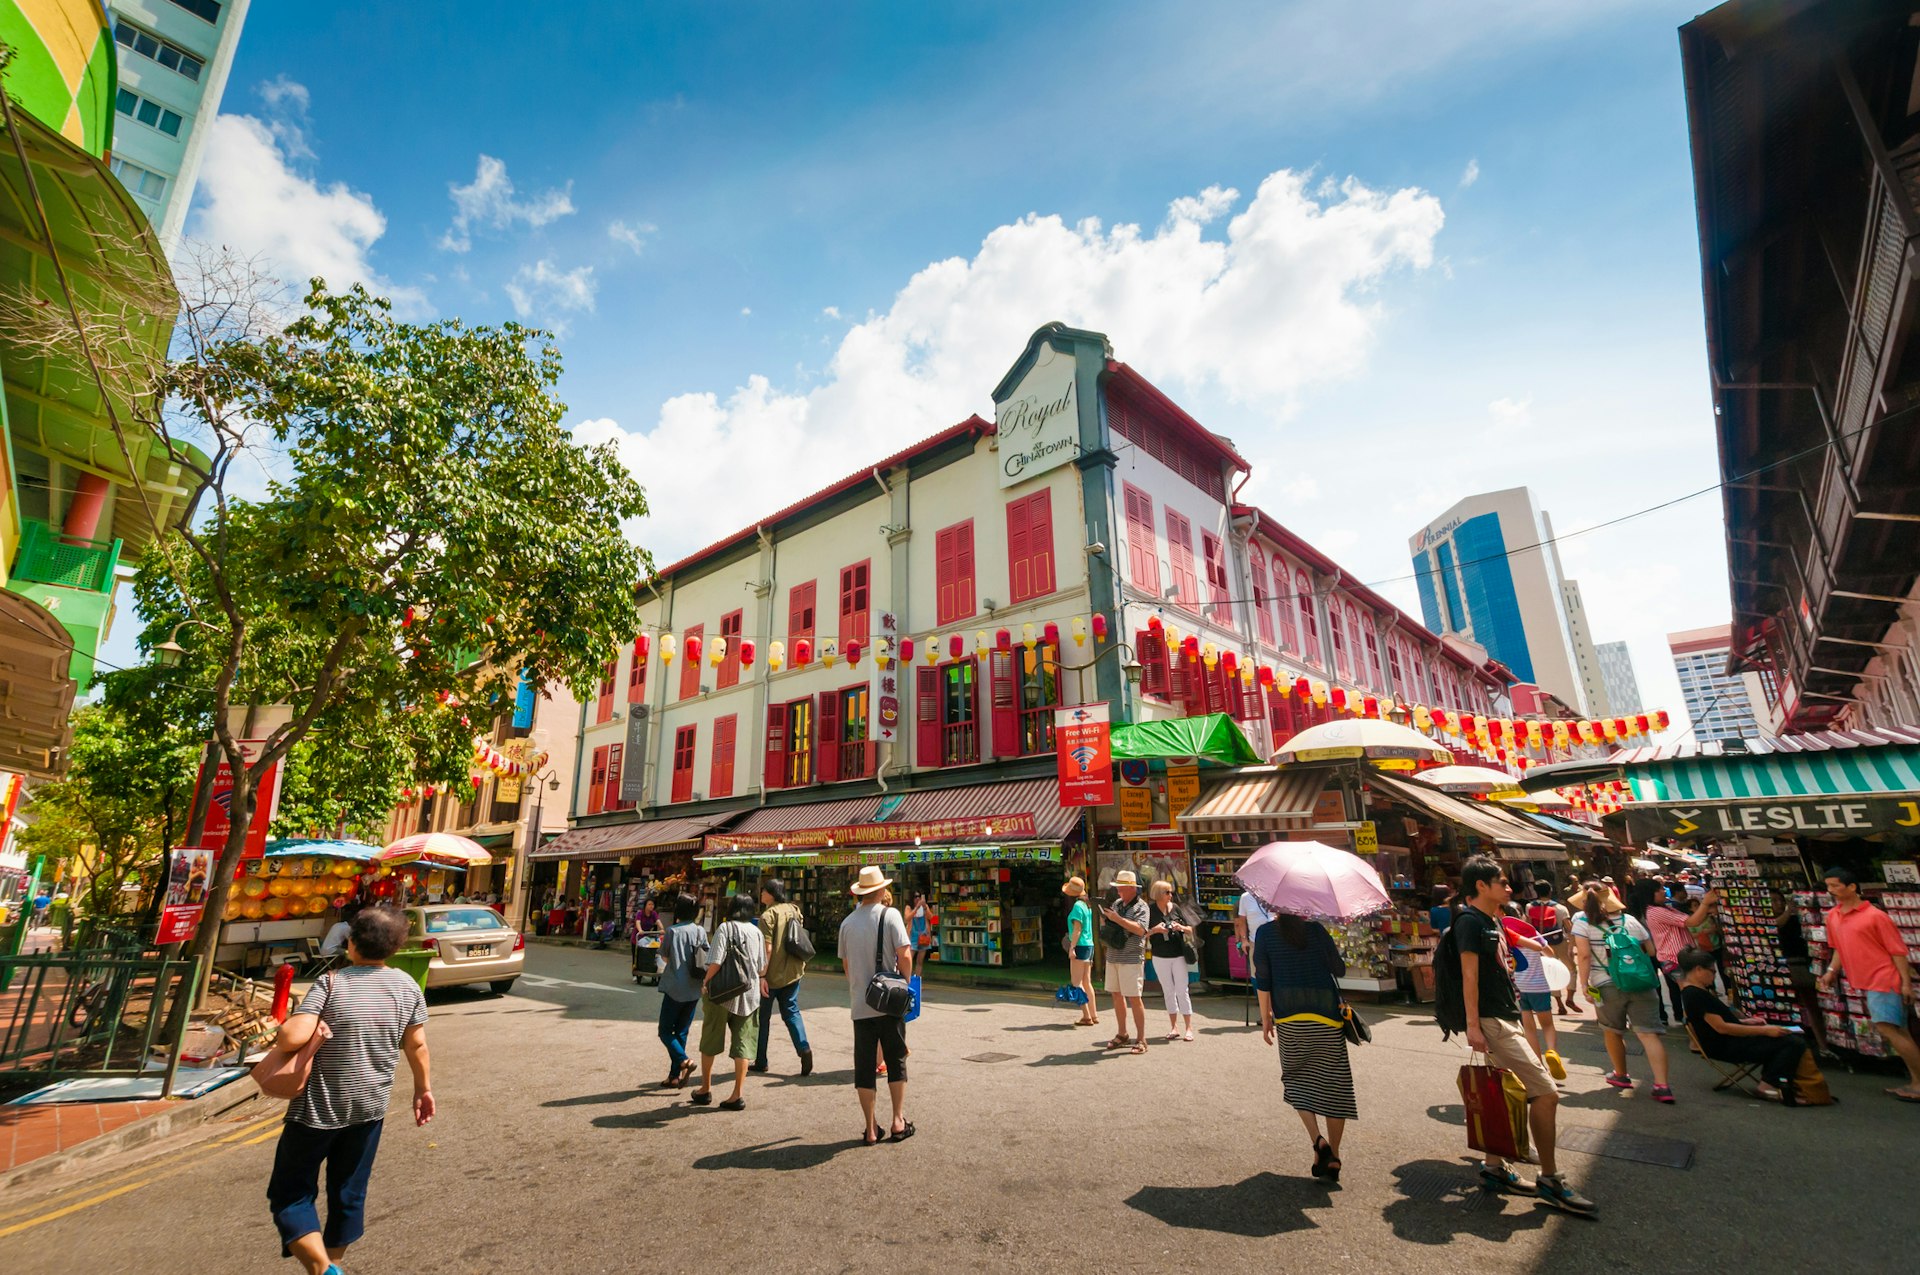 Tourists milling around the street of Chinatown in Singapore as the sun beats down; some carry umbrellas to give them shade